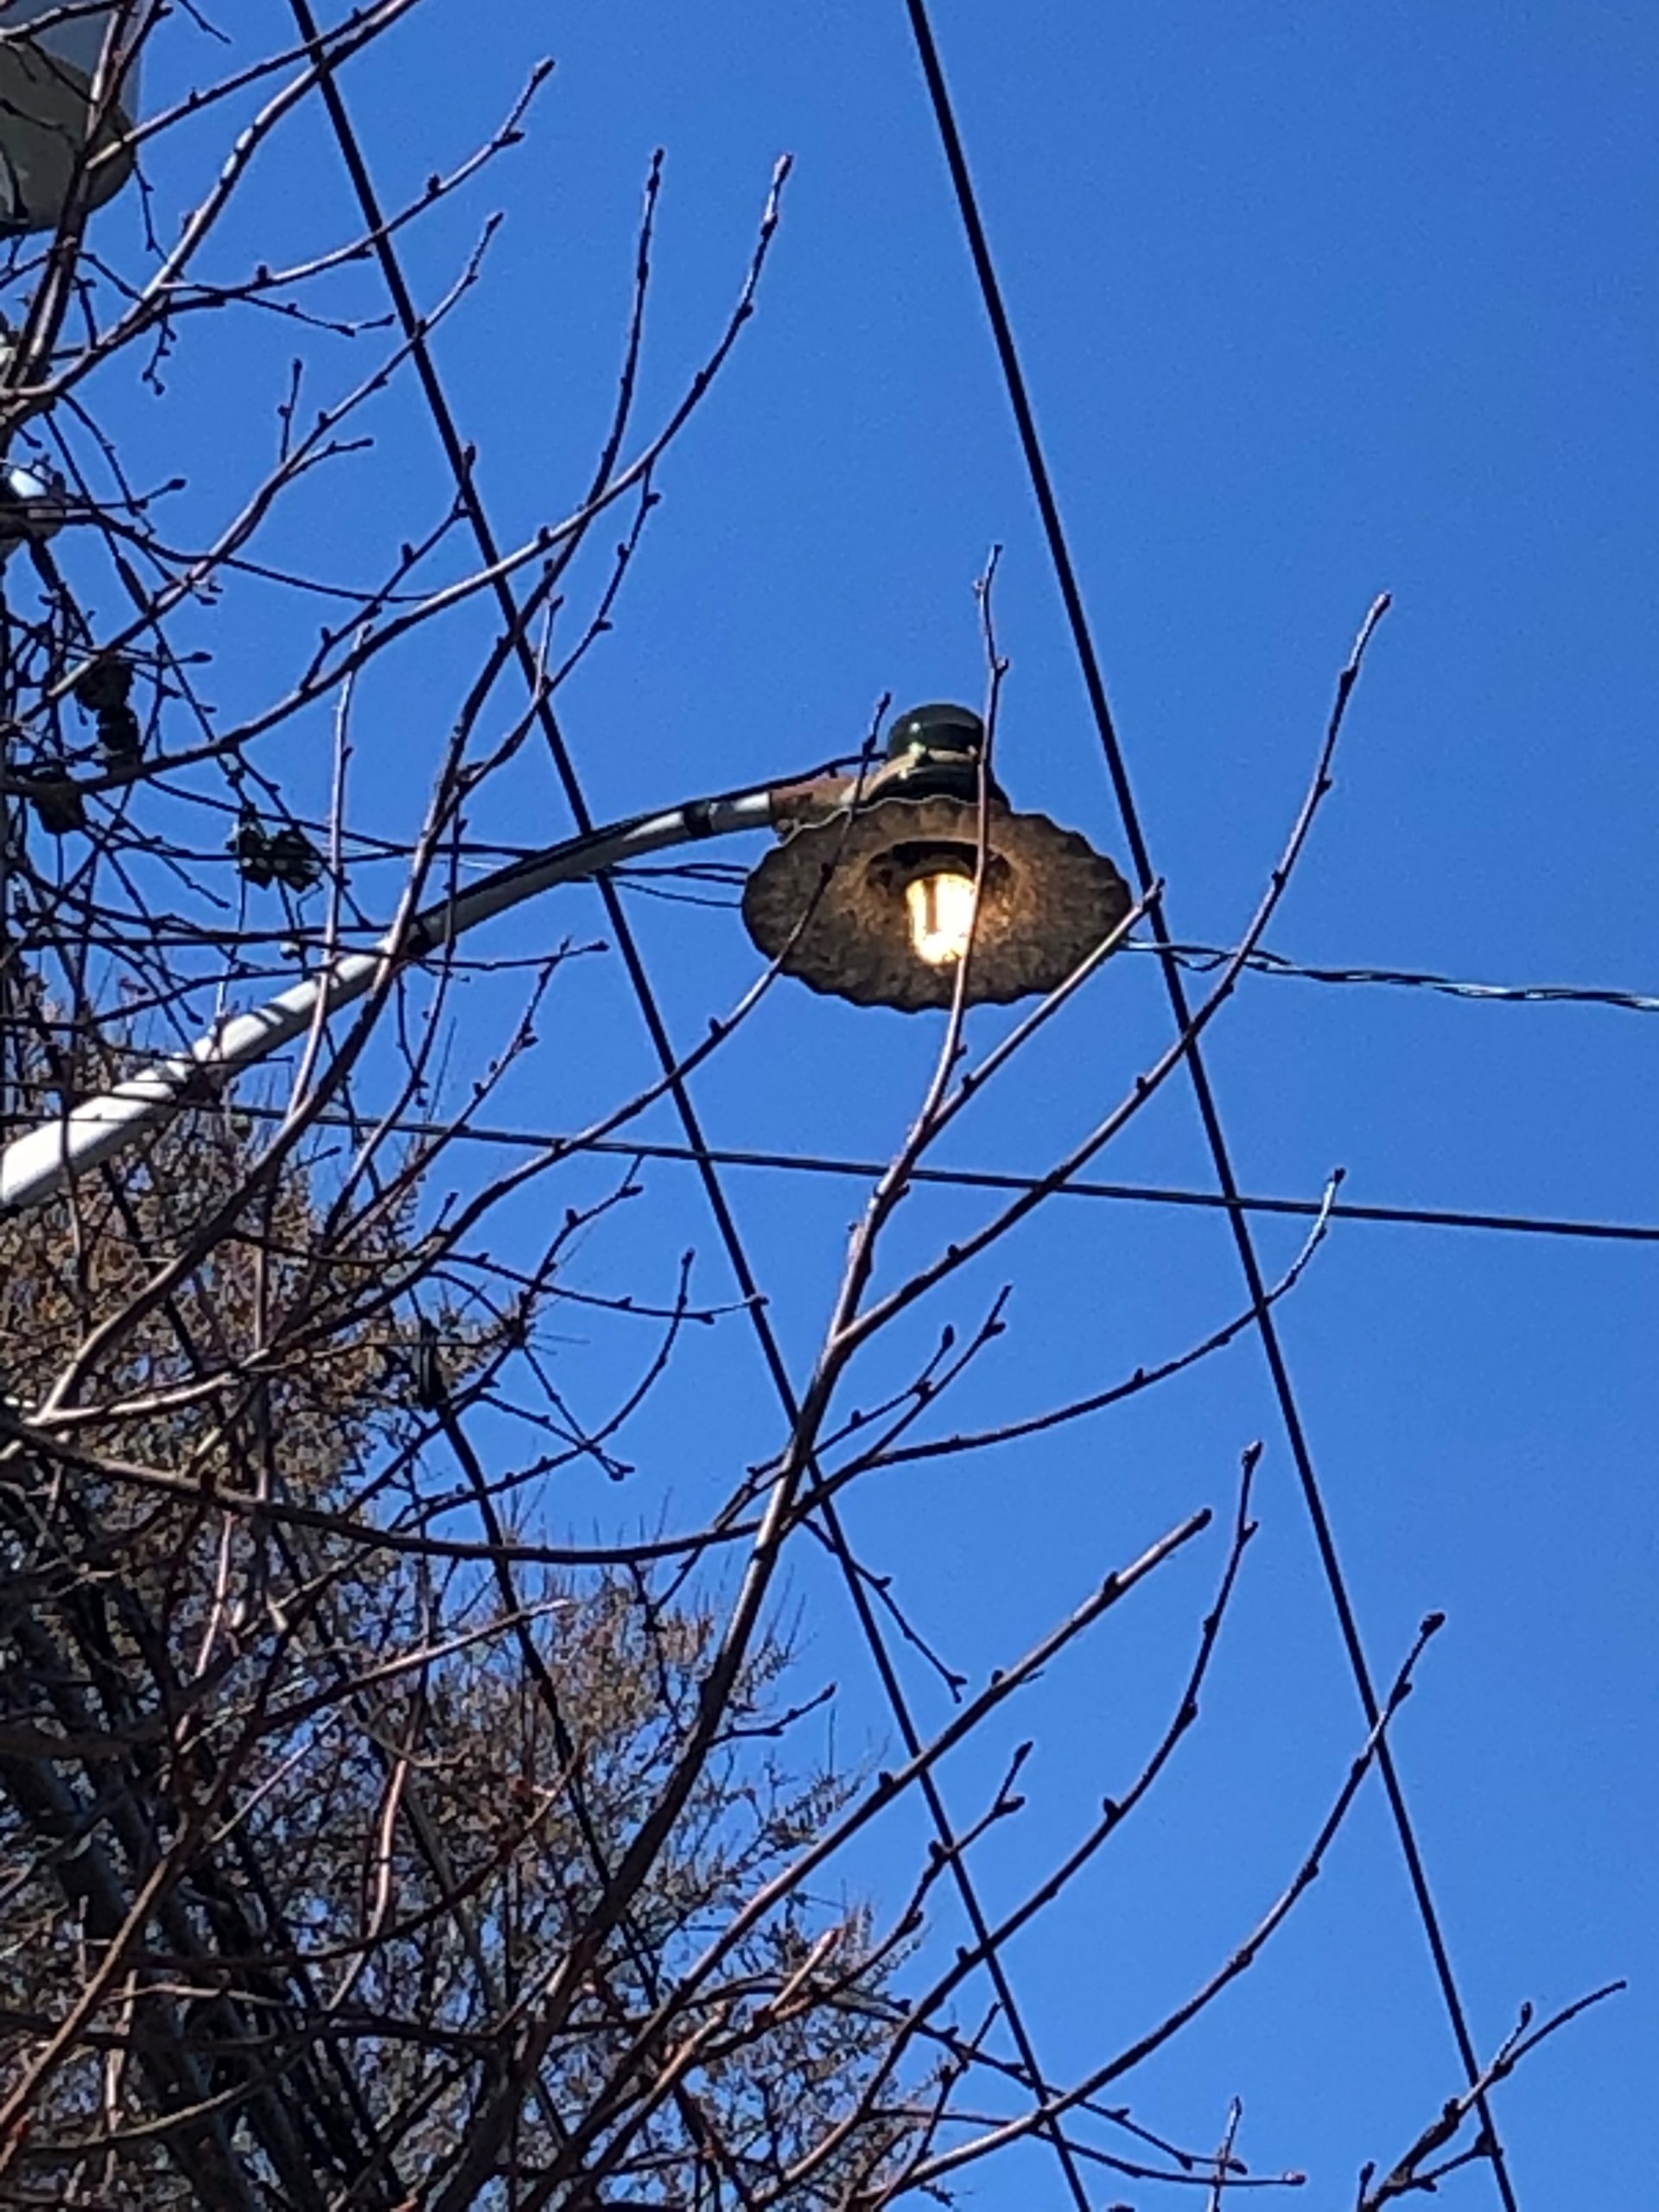 A Sag Harbor streetlight, 2:19 p.m. “Day burners” like this one contribute to overall mismanaged lighting, costing $3.3 billion and the release of 21 million tons of carbon dioxide per year. JENNY NOBLE